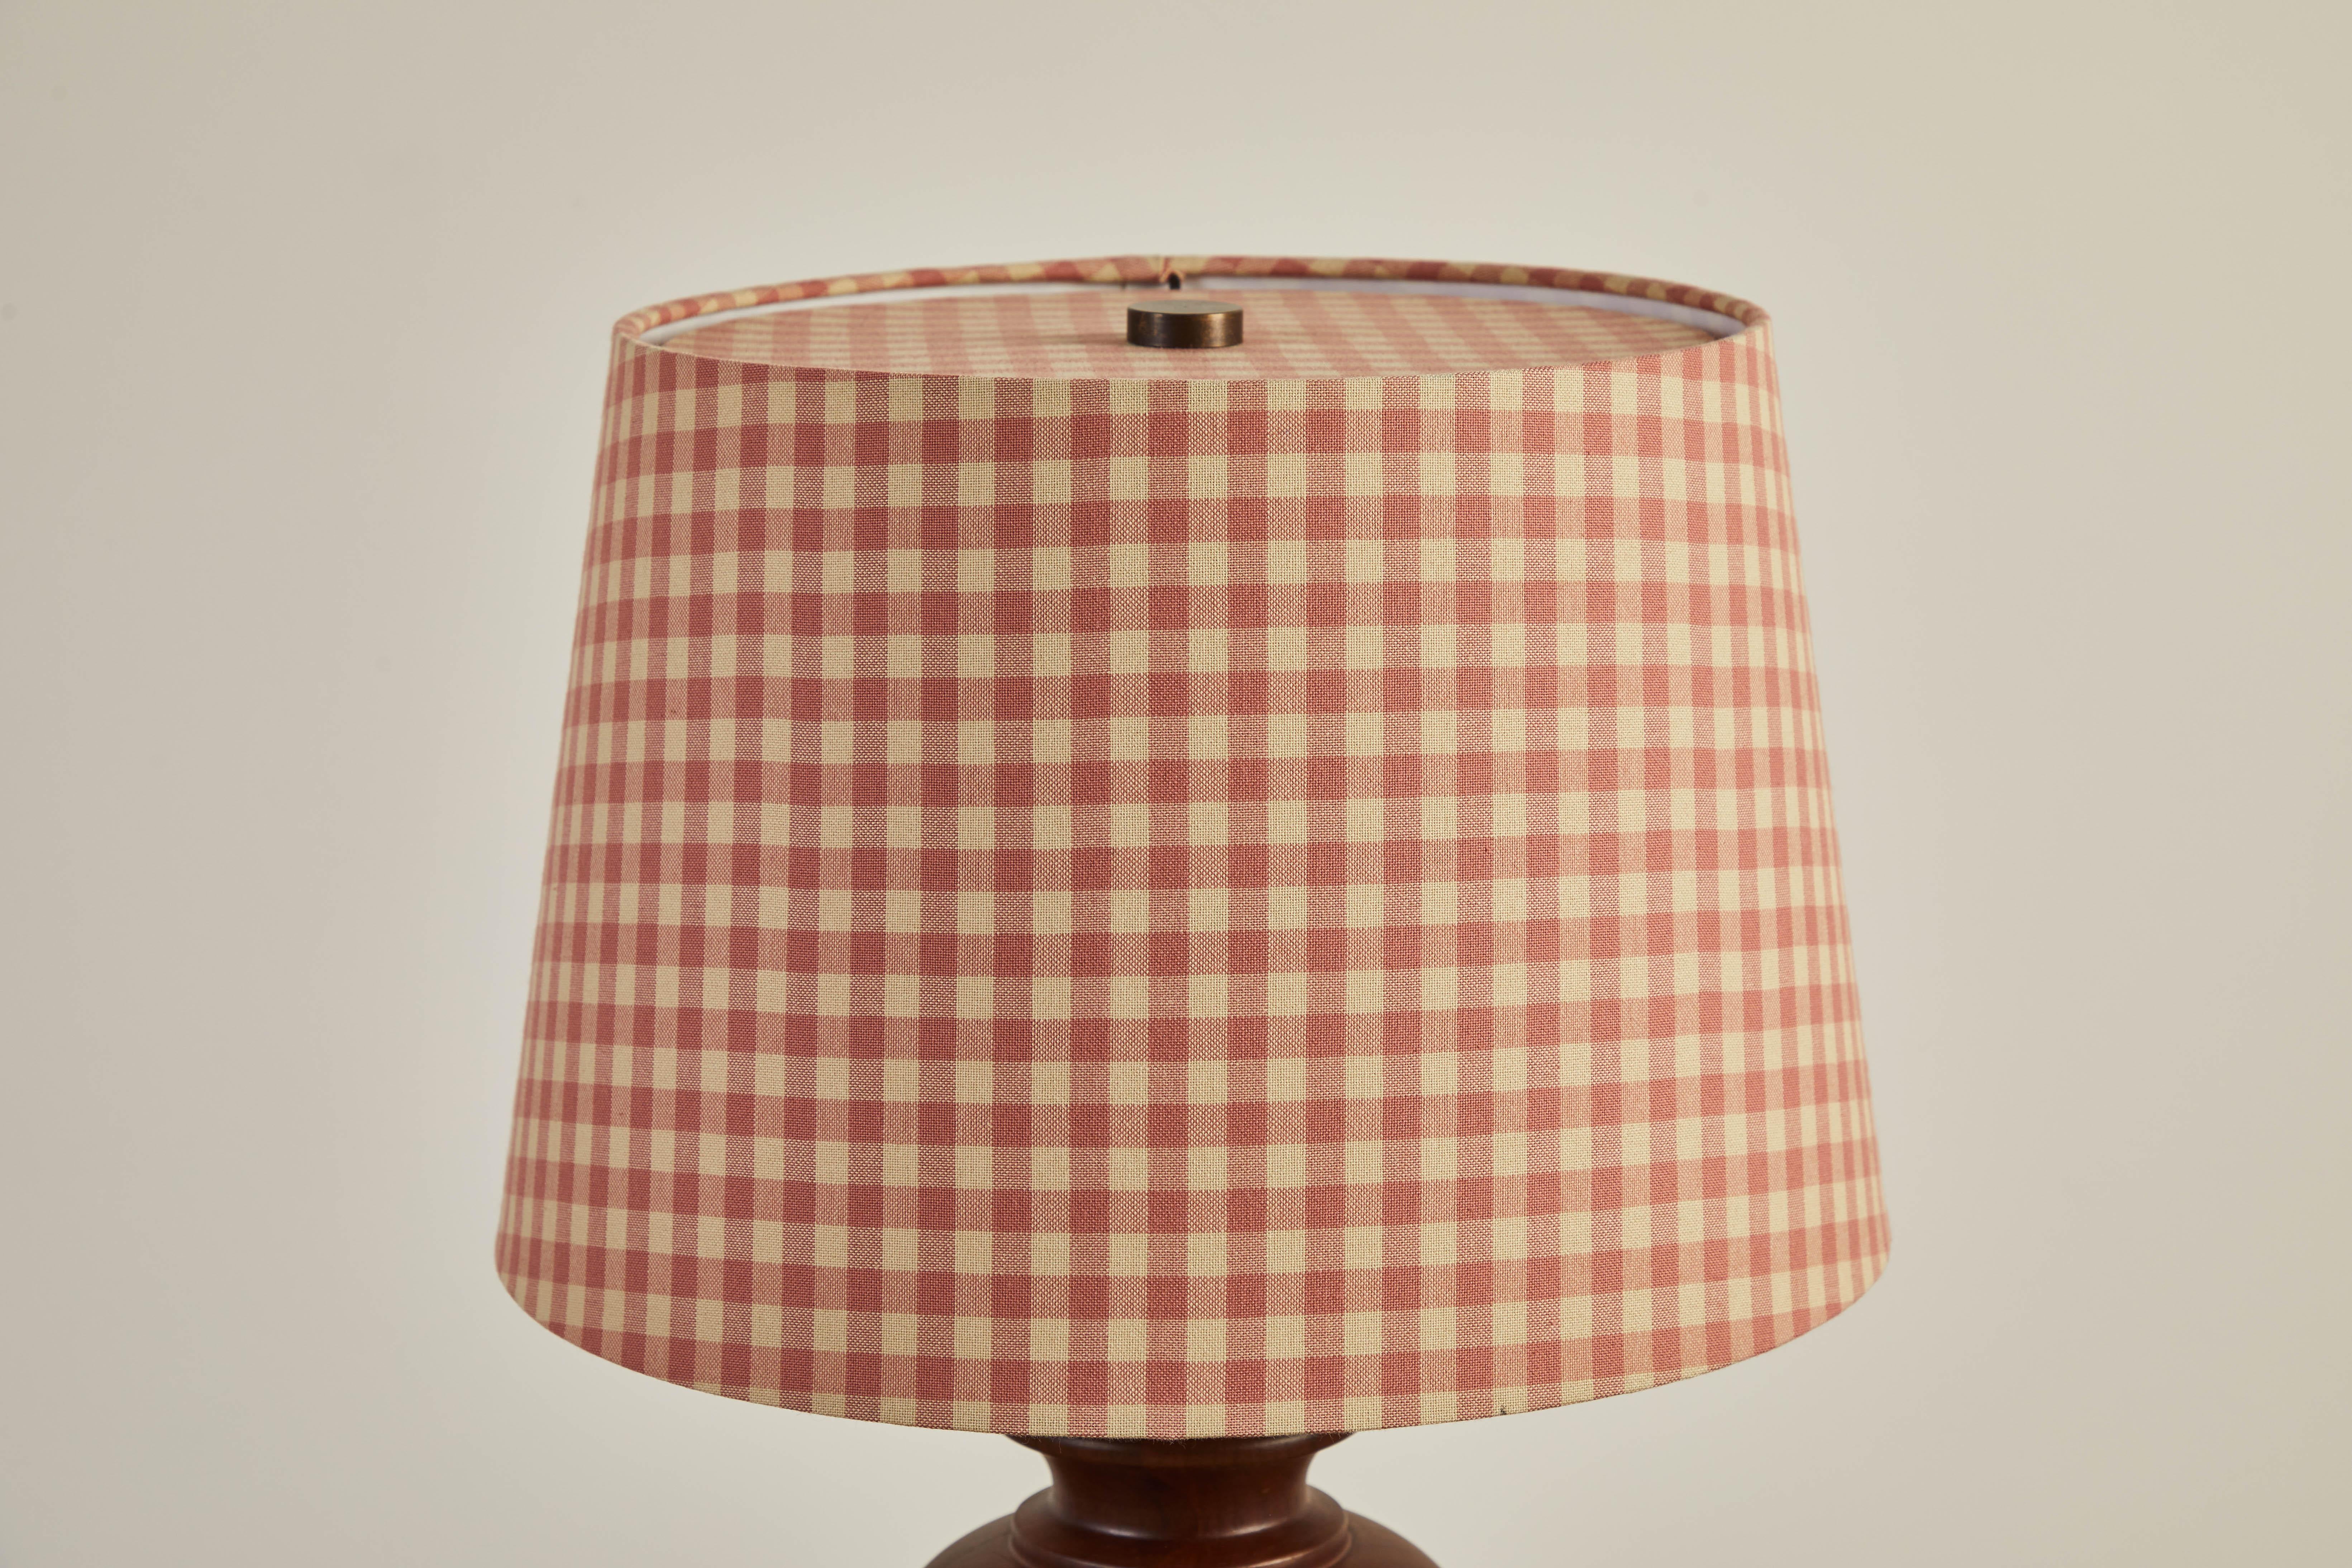 Nickey Kehoe collection urn lamp made from hand-turned walnut. Custom shade made from vintage check fabric.